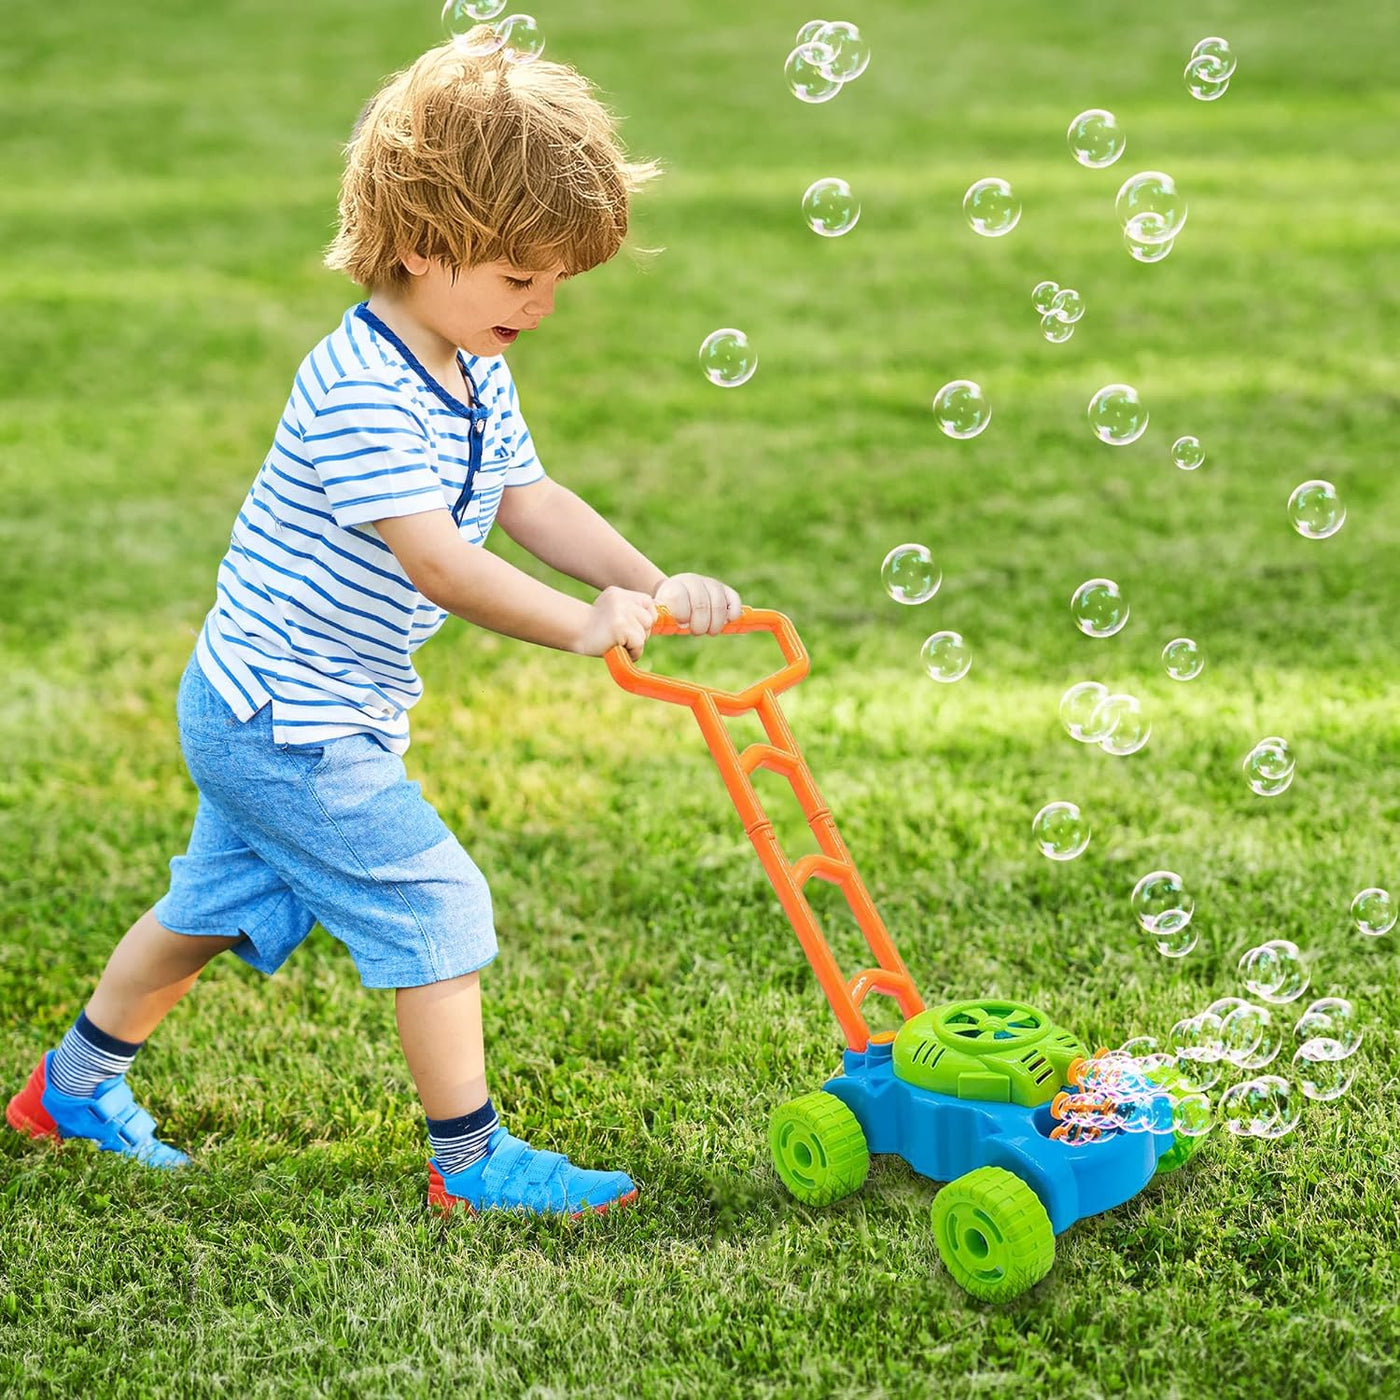 Play Day Bubble Mower - Outdoor Pretend Play Toy for Kids